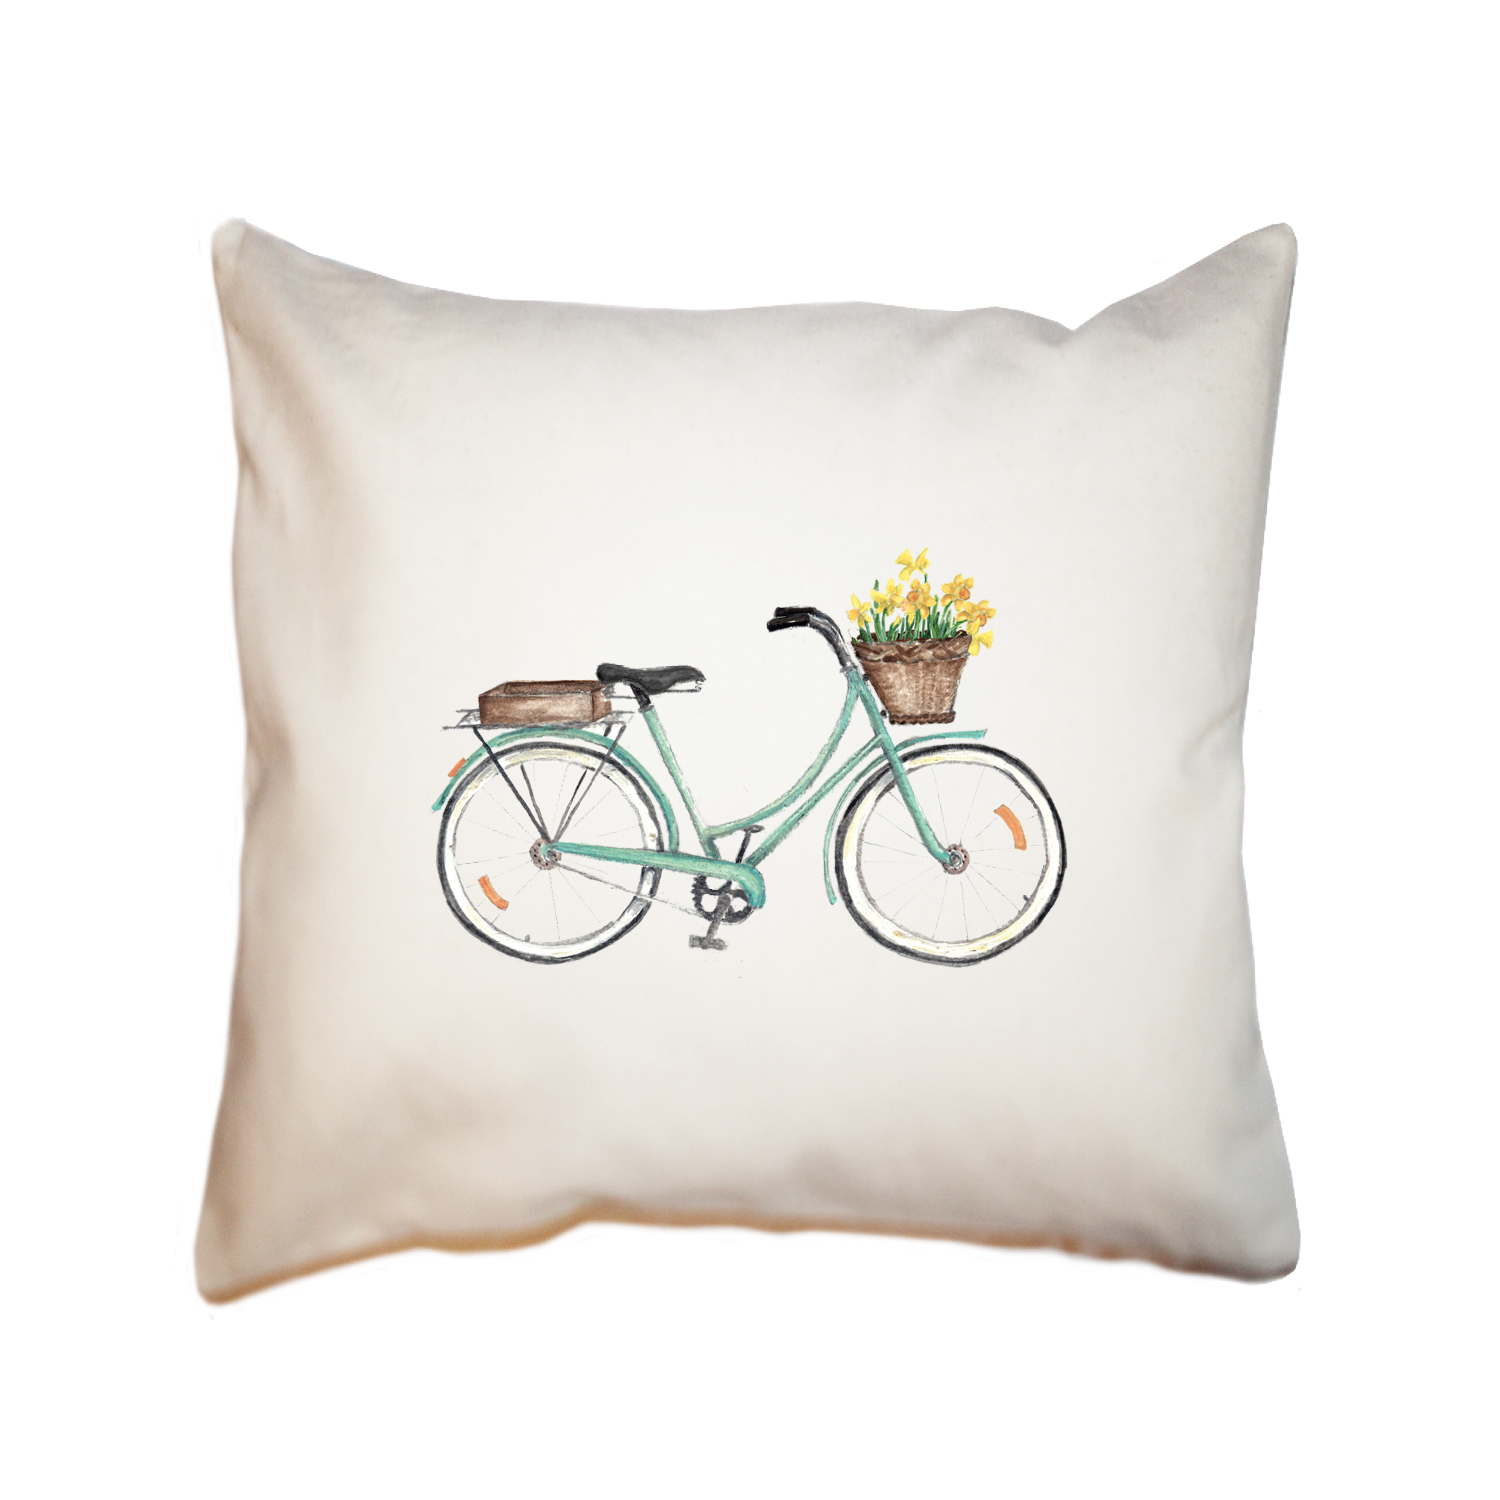 seafoam bike with daffodils in front square pillow